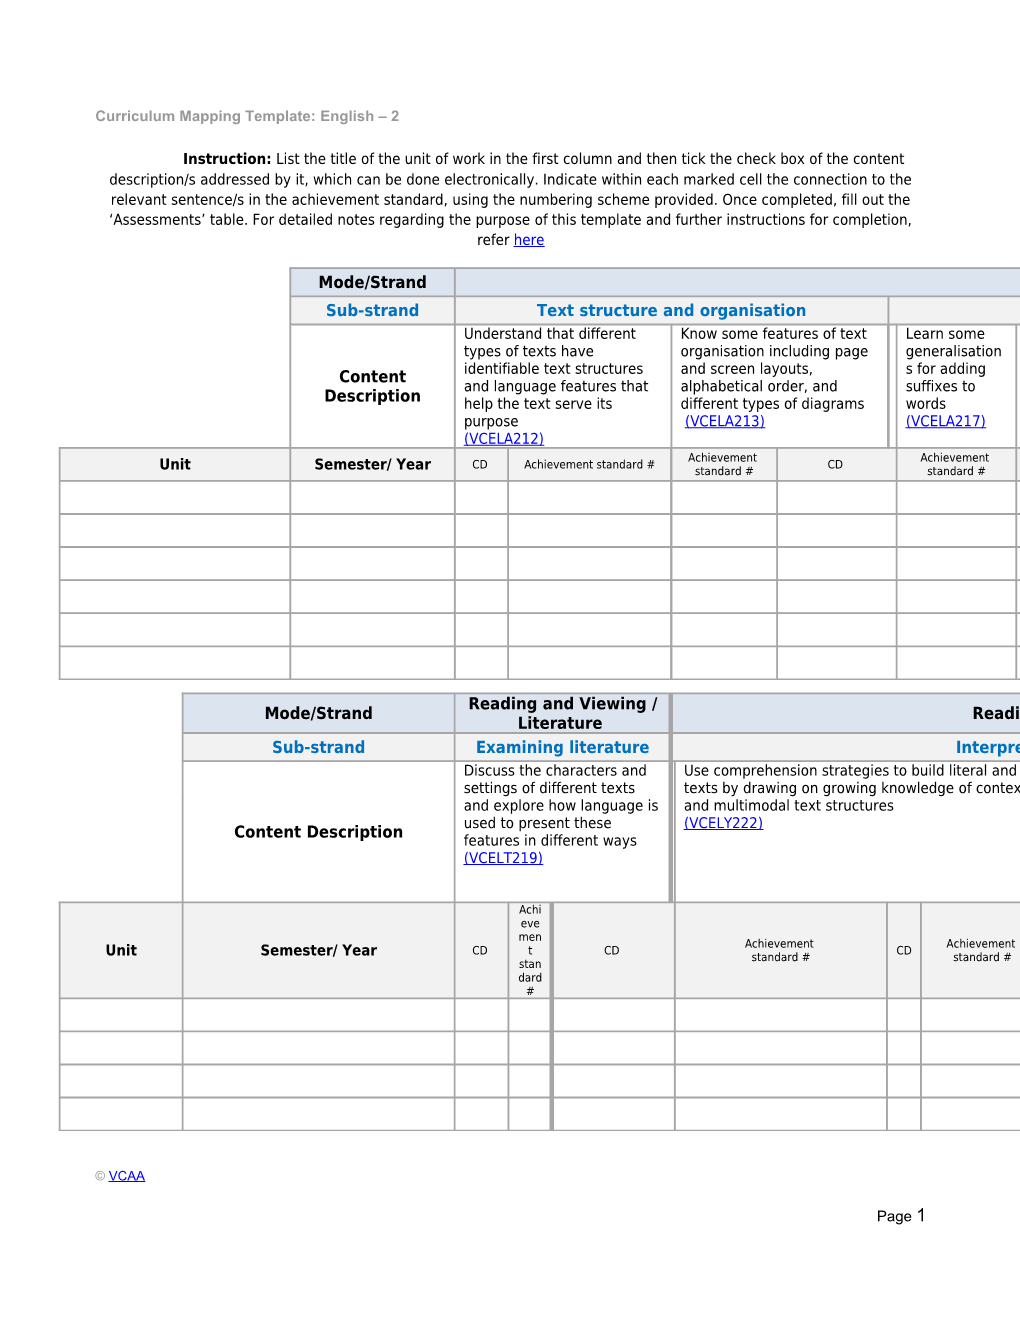 Curriculum Mapping Template: English 2